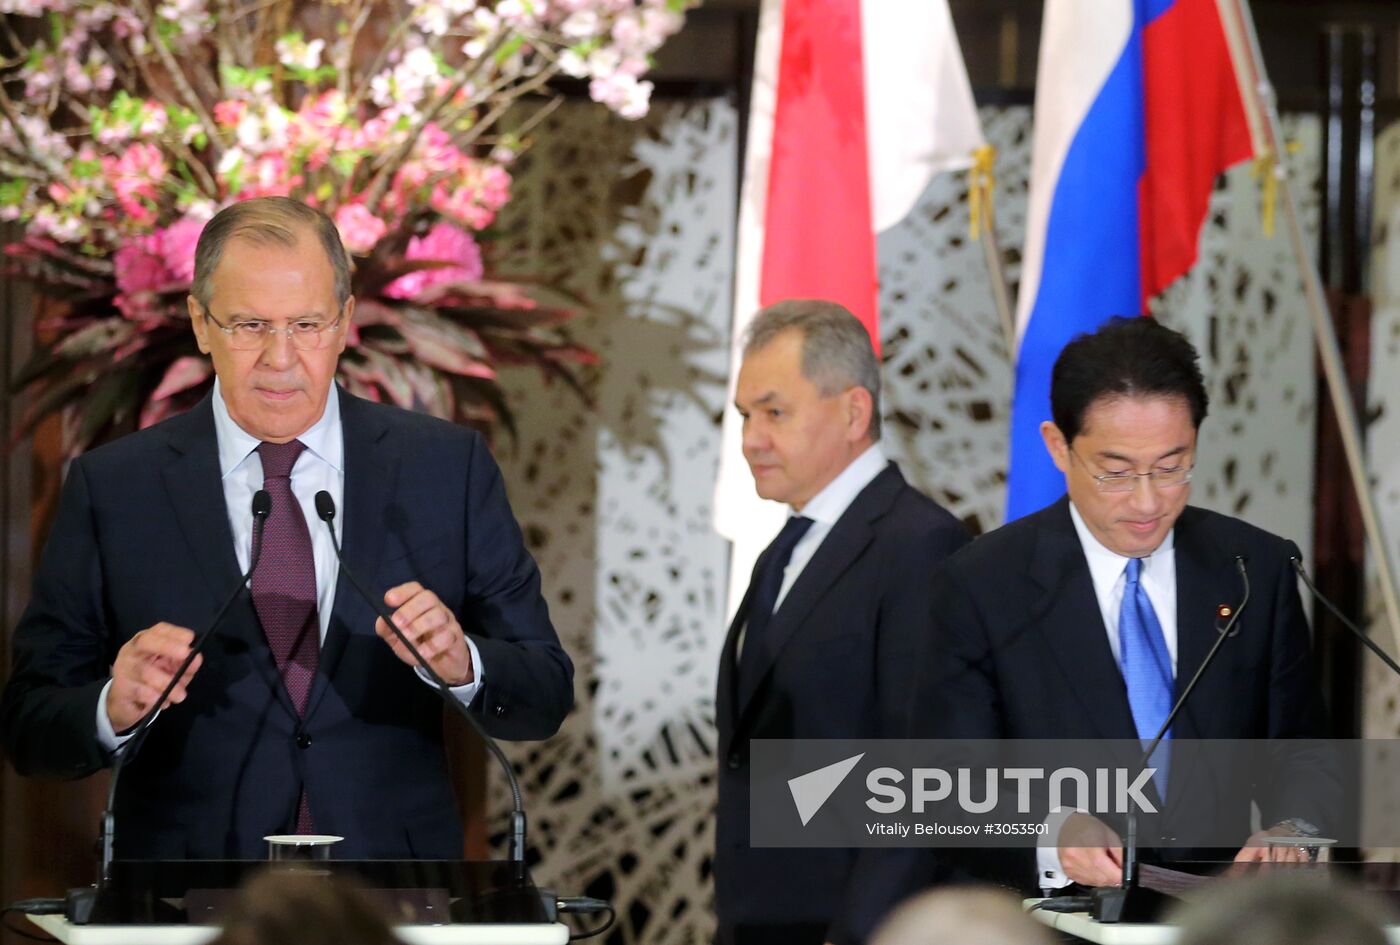 Russian Foreign Minister Sergei Lavrov and Defense Minister Sergei Shoigu visit Japan